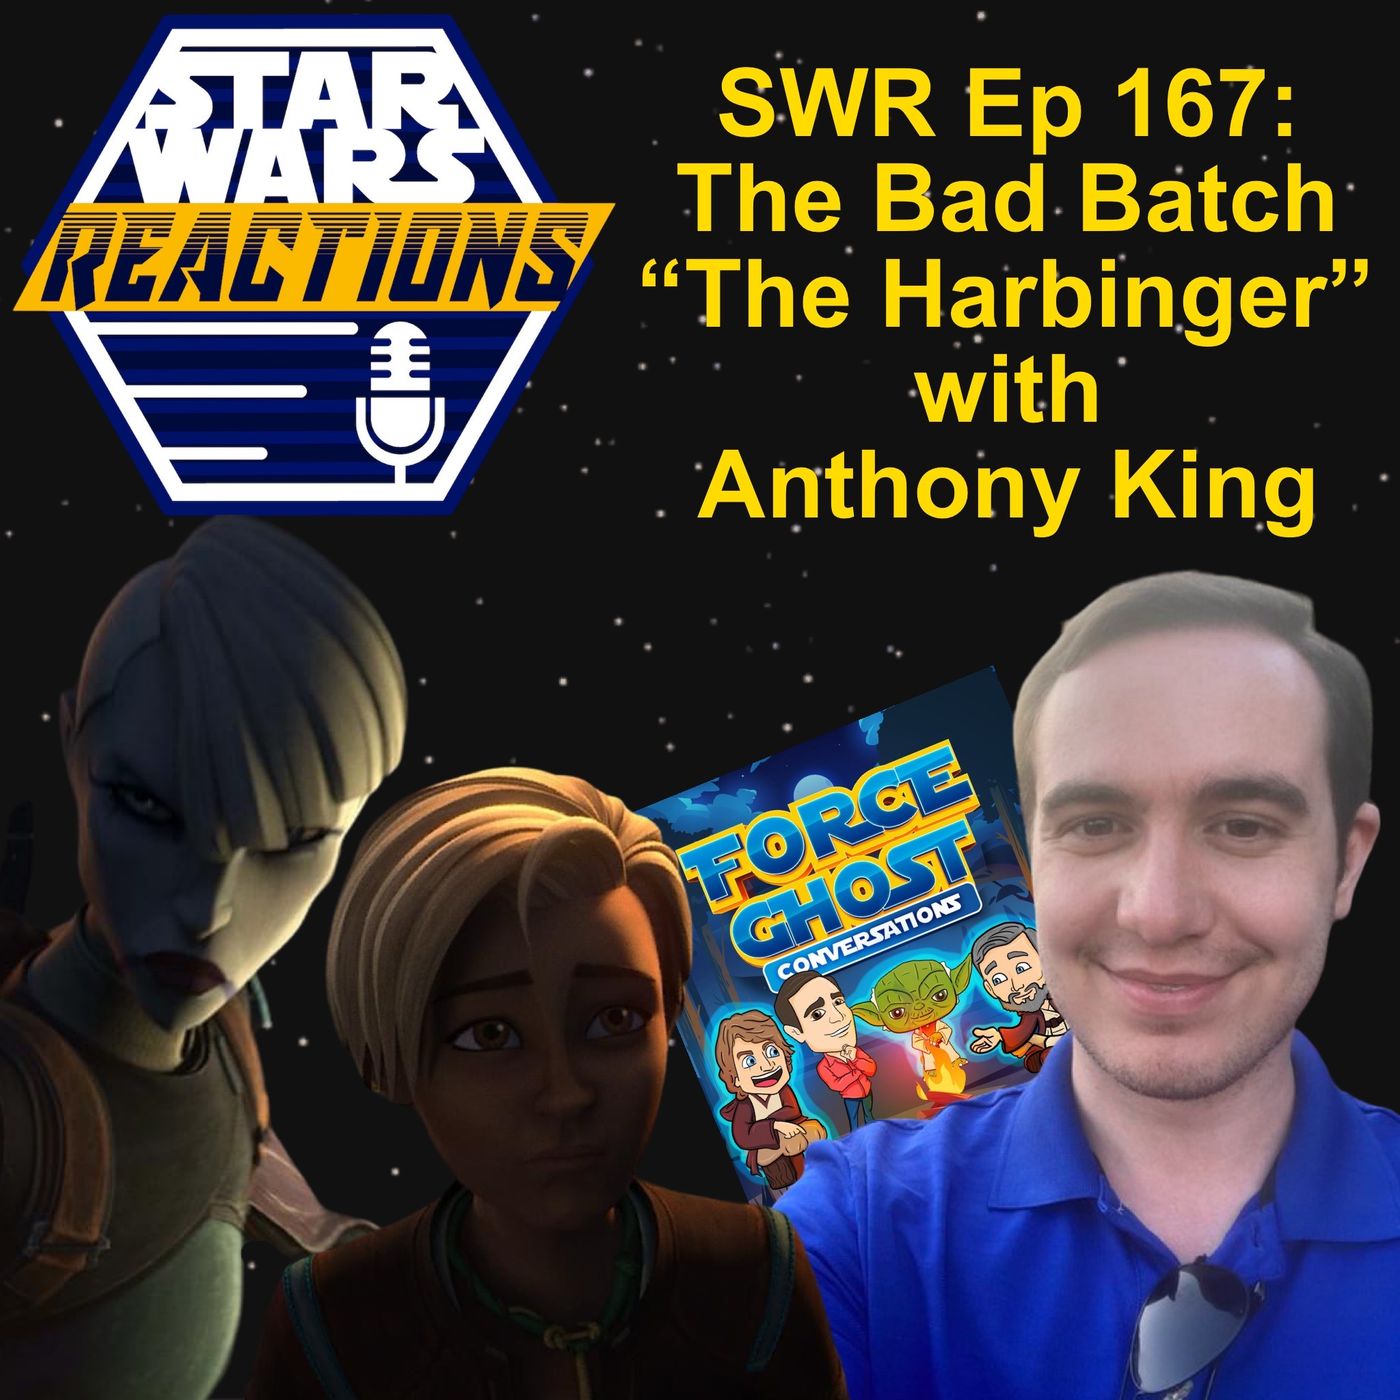 SWR Ep. 167: The Bad Batch "The Harbinger" with Anthony King